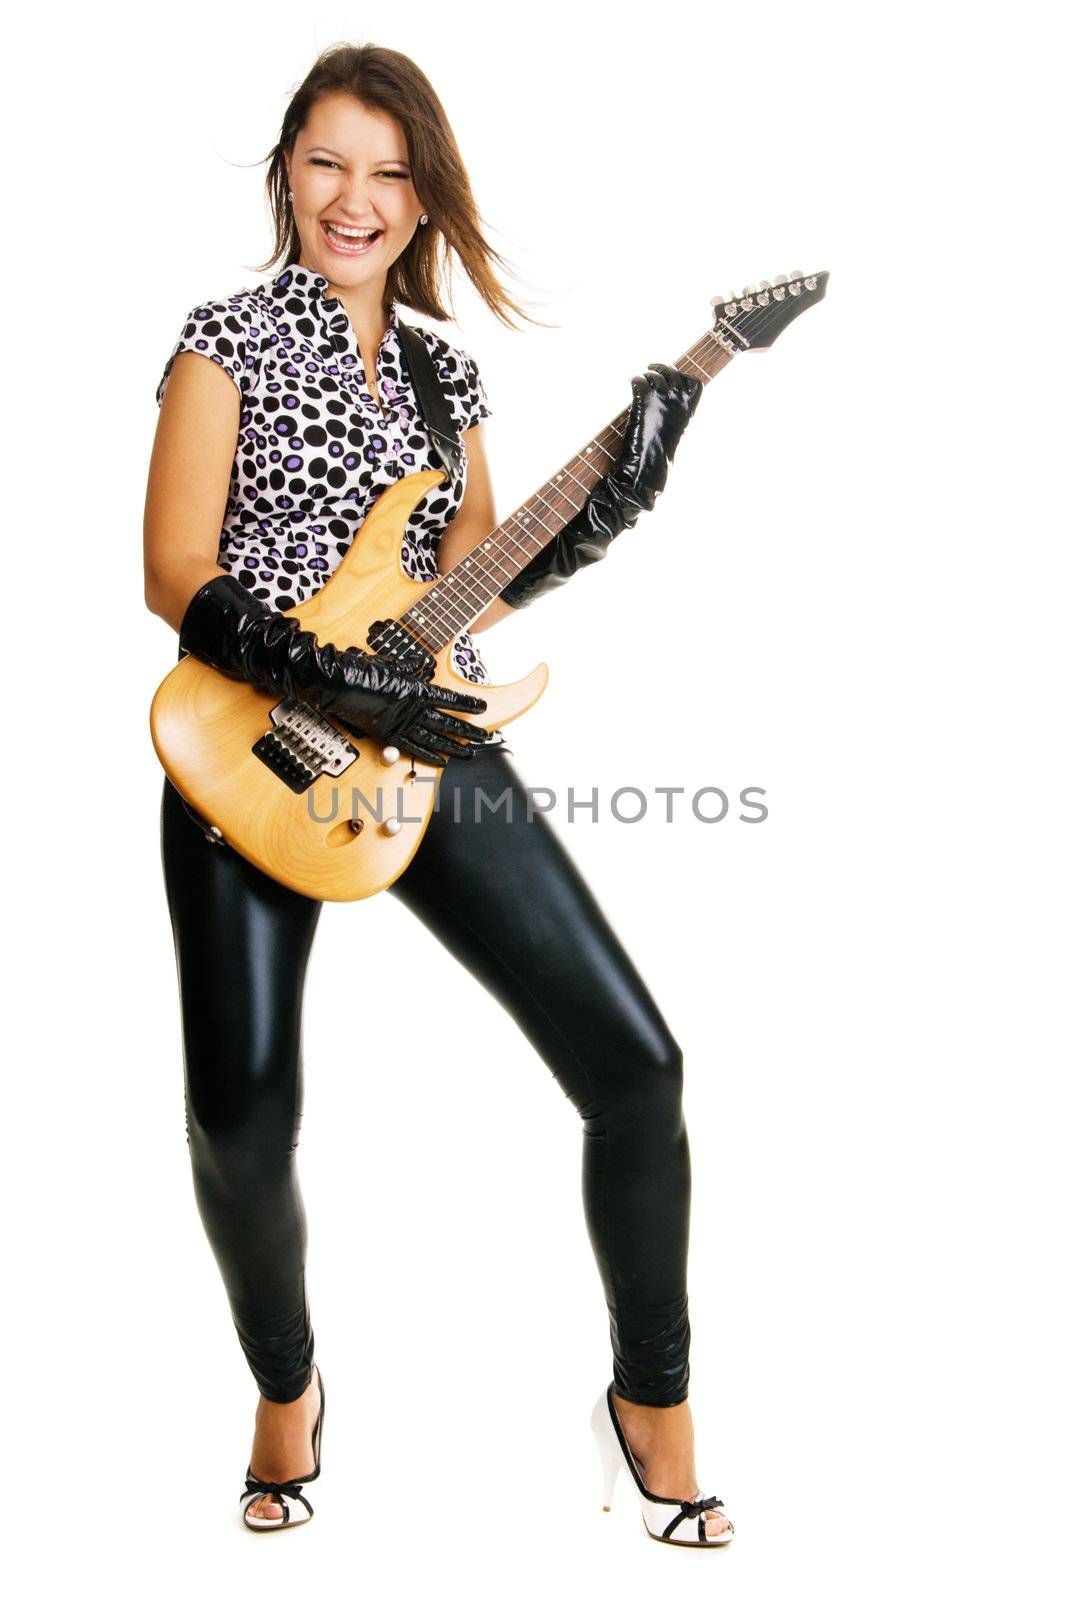 Attractive lady expressively playing an electric guitar